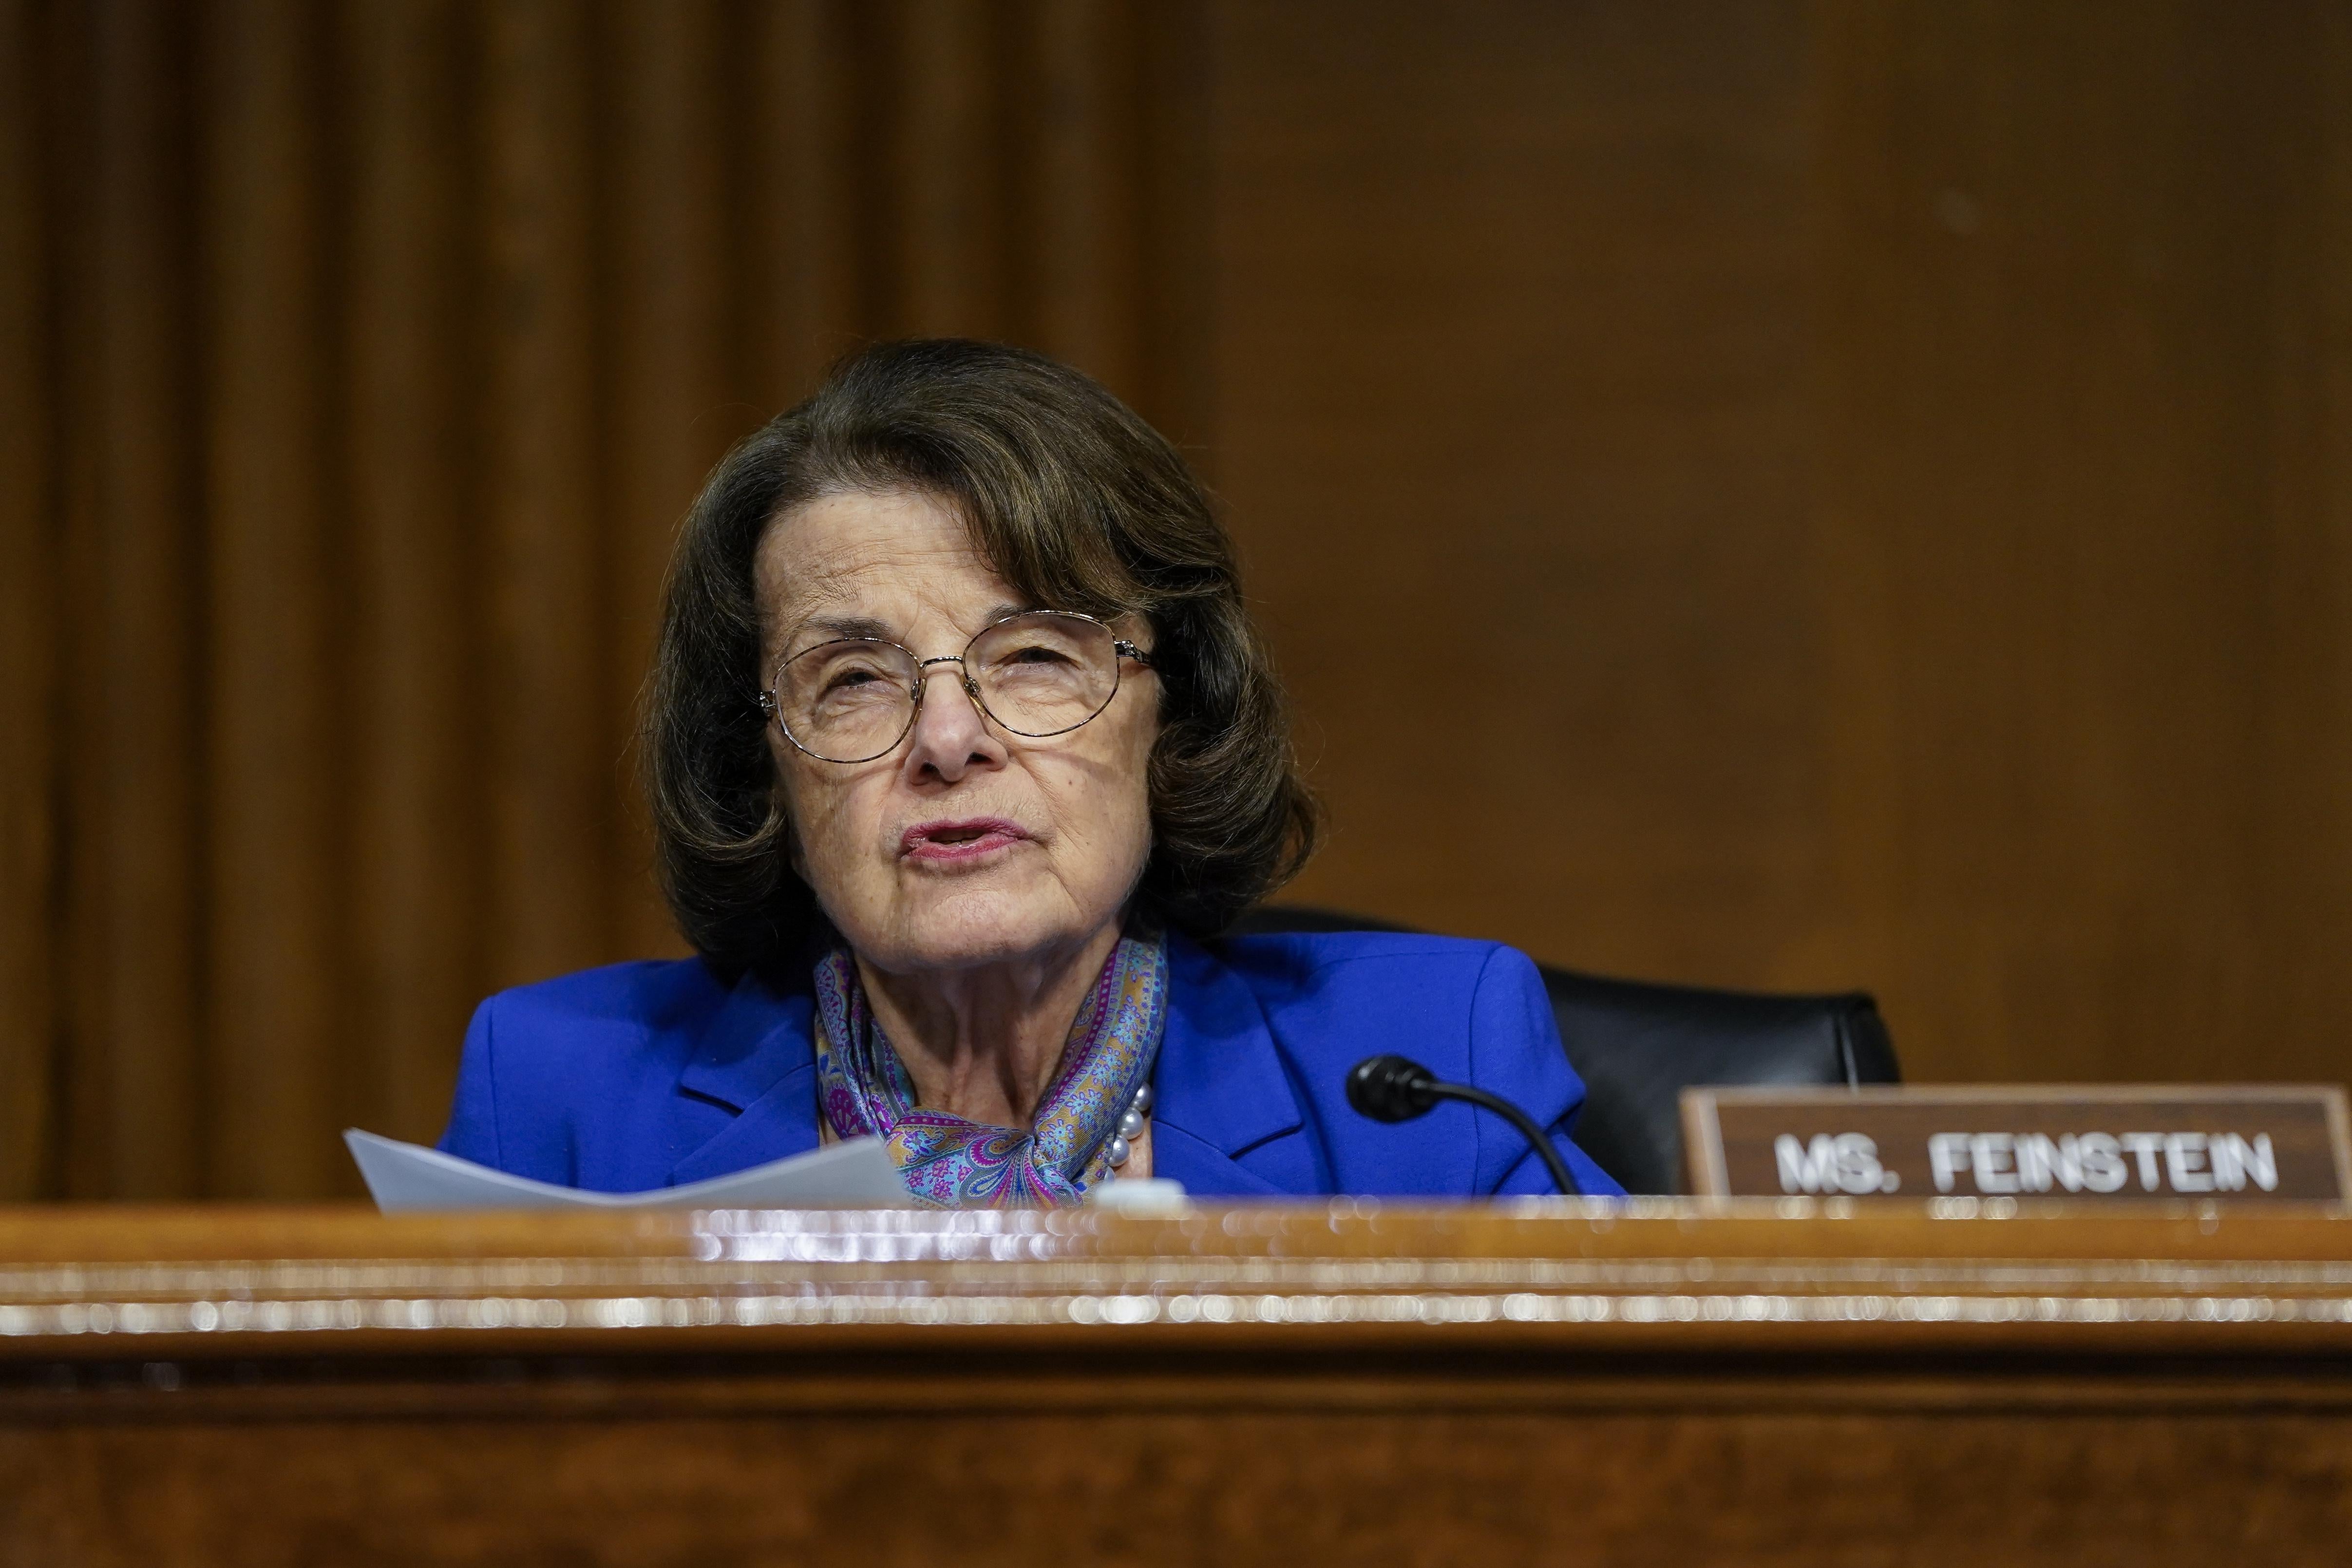 Sen. Dianne Feinstein (D-CA) questions witnesses during a Senate Intelligence Committee hearing on Capitol Hill on February 23, 2021 in Washington, D.C.